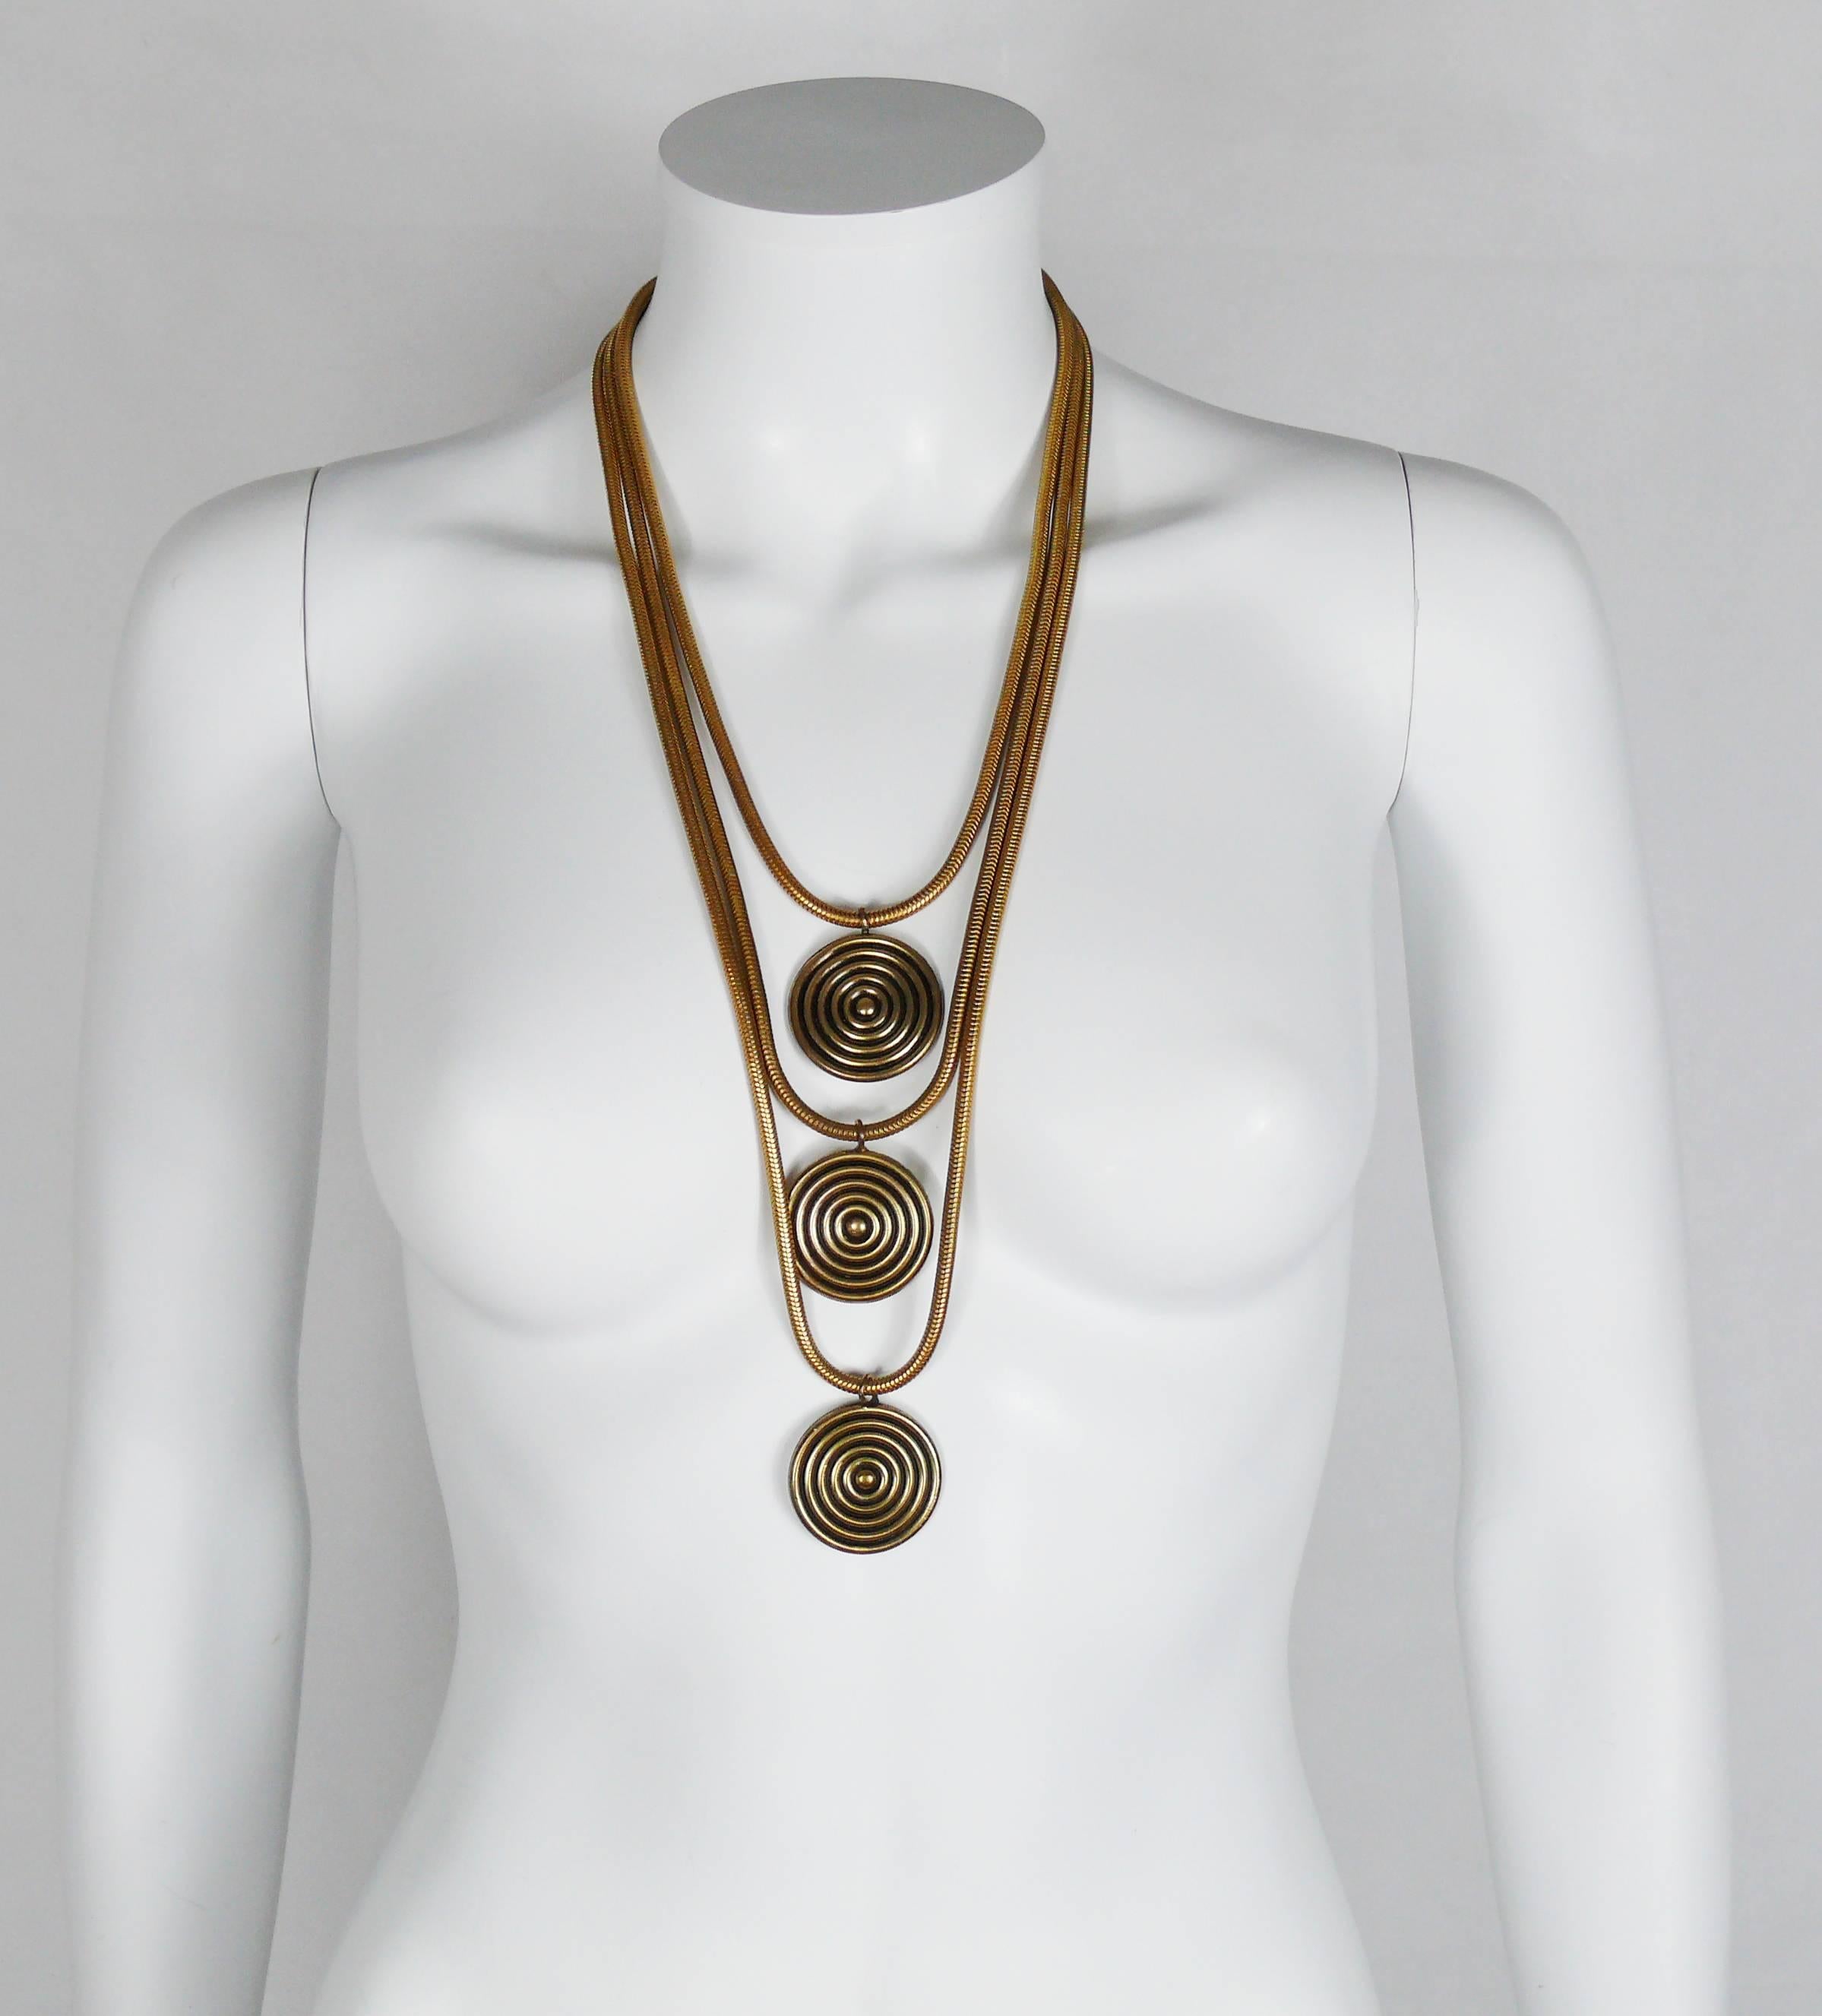 YVES SAINT LAURENT vintage 1970s multi-strand sautoir necklace featuring gold toned snake chains with 3 concentric disc charms.

Hook clasp closure.

Embossed YSL France on the clasp.

Indicative measurements : length approx. 57 cm (22.44 inches) /